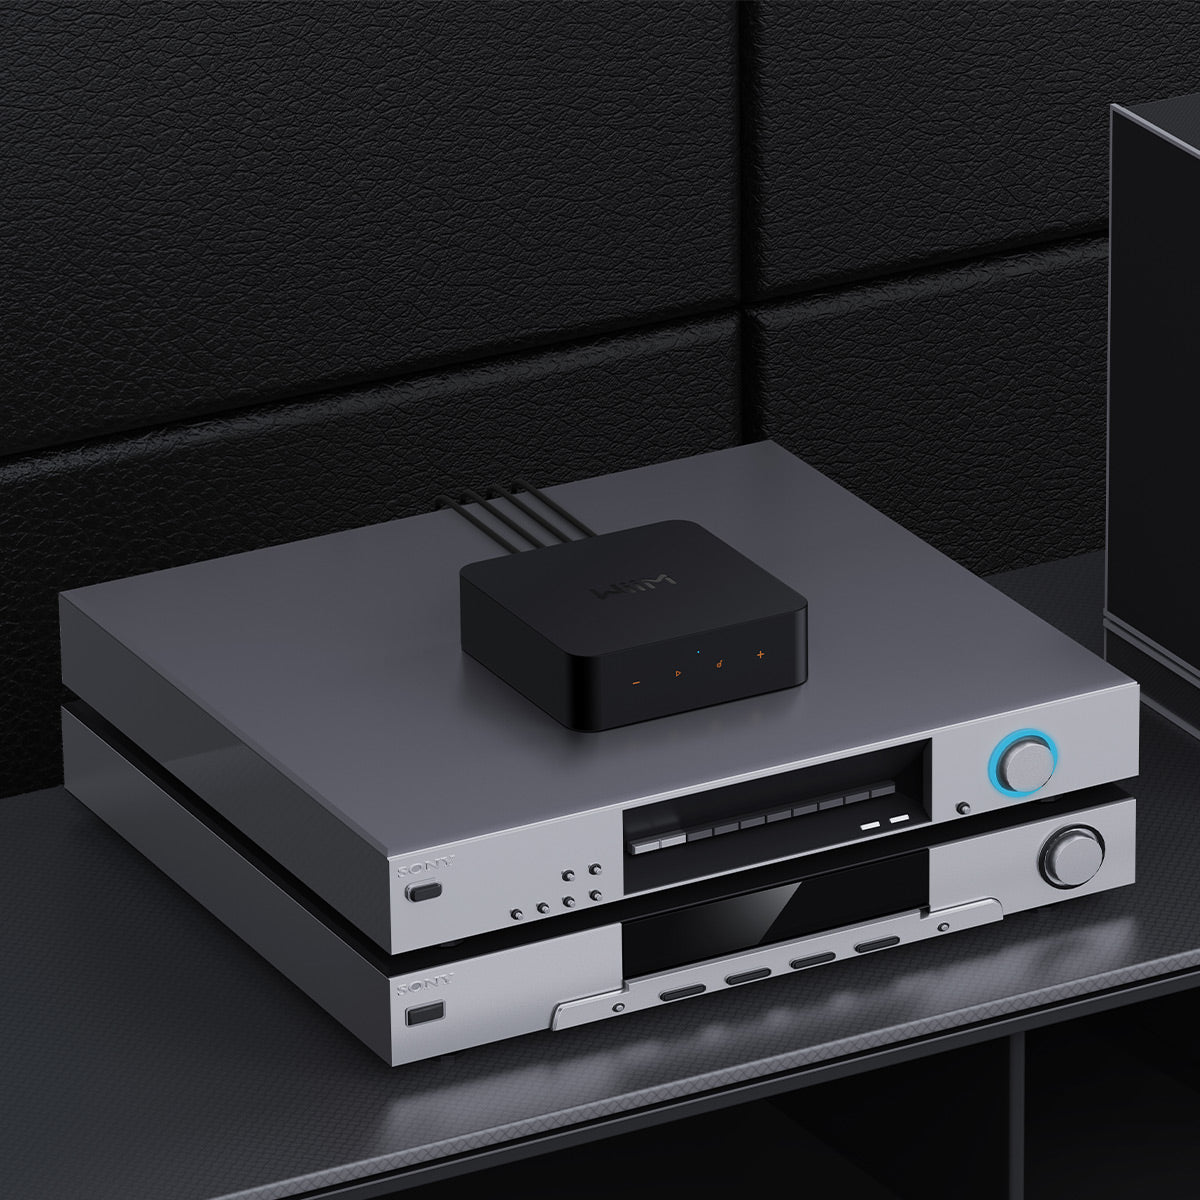 Get Streaming with WiiM, NAD, and Cambridge Audio